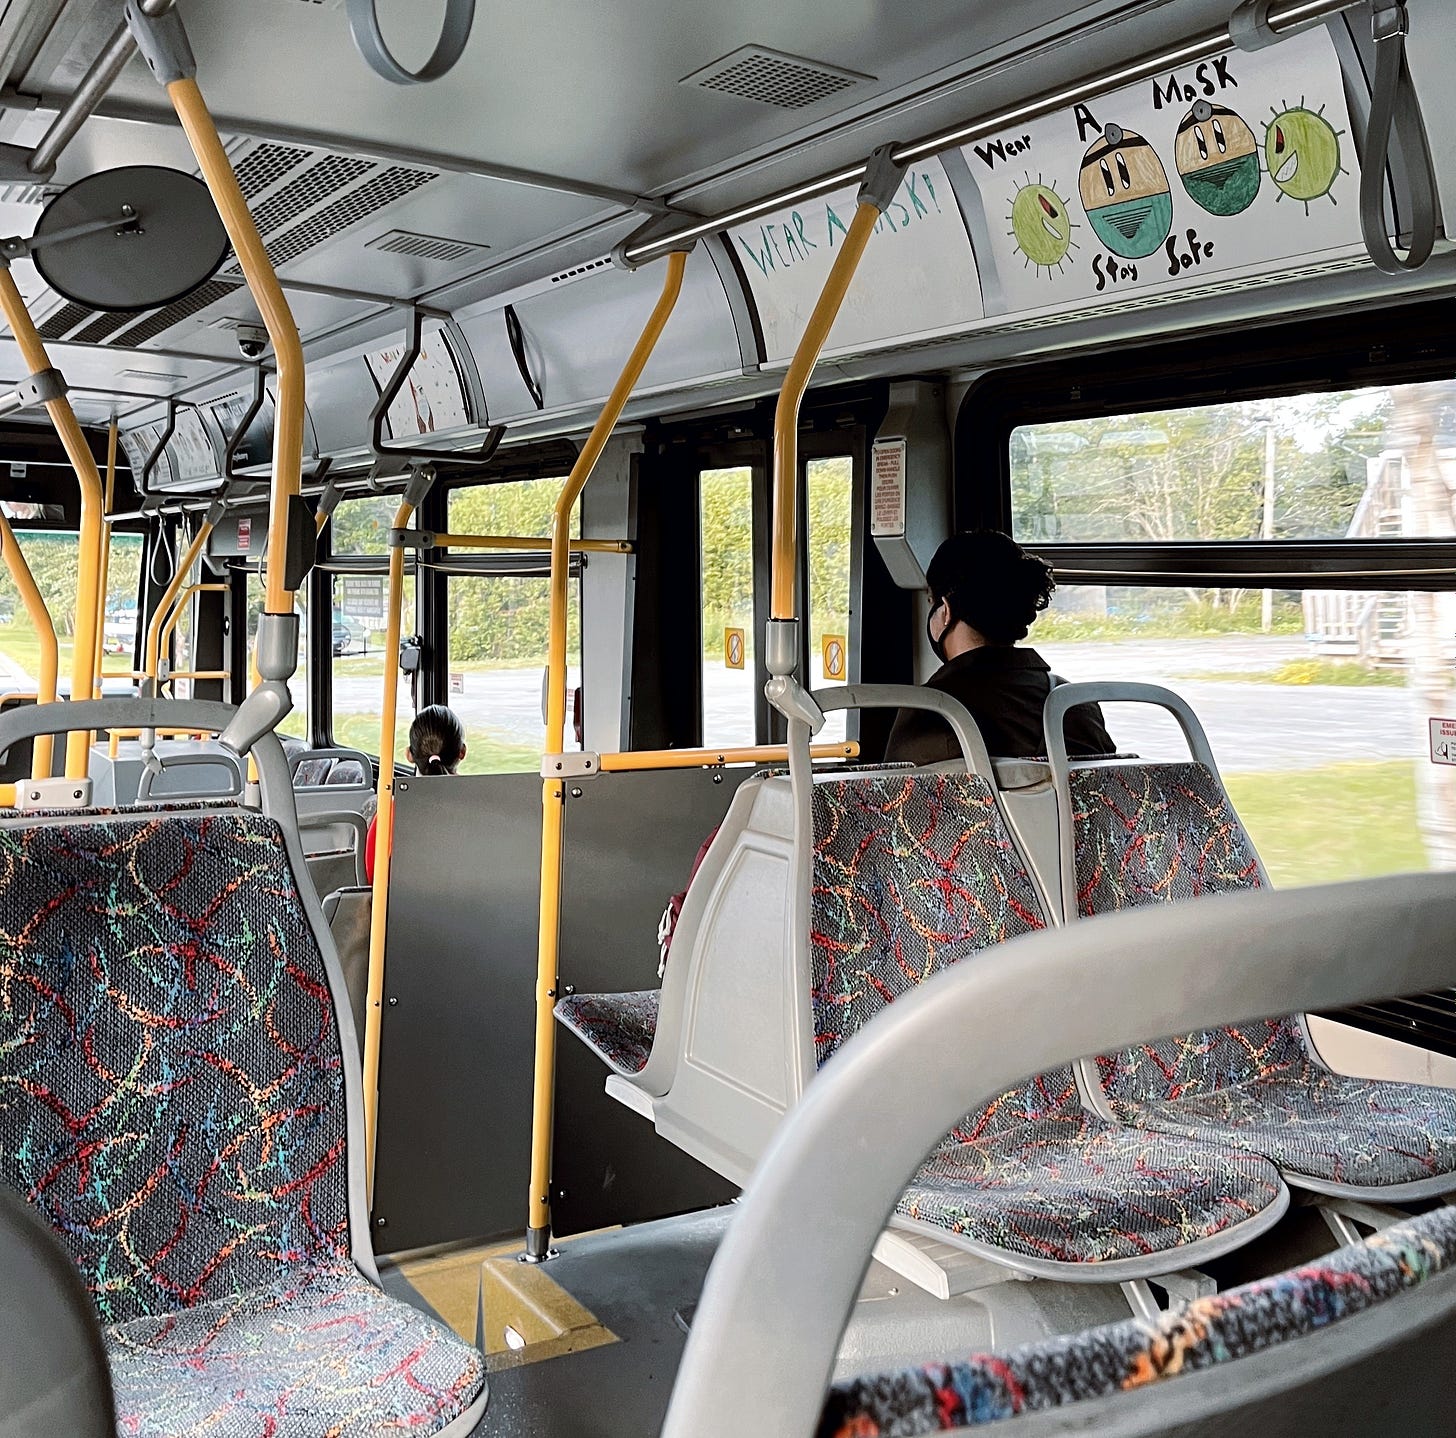 Interior of Saint John Transit bus. Focus is on one of the advertising panels, which is a hand-drawn image by a child, of two yellow face emojis wearing masks, flanked by sneering coronavirus particles. The message reads, "Wear a Mask. Stay Safe"